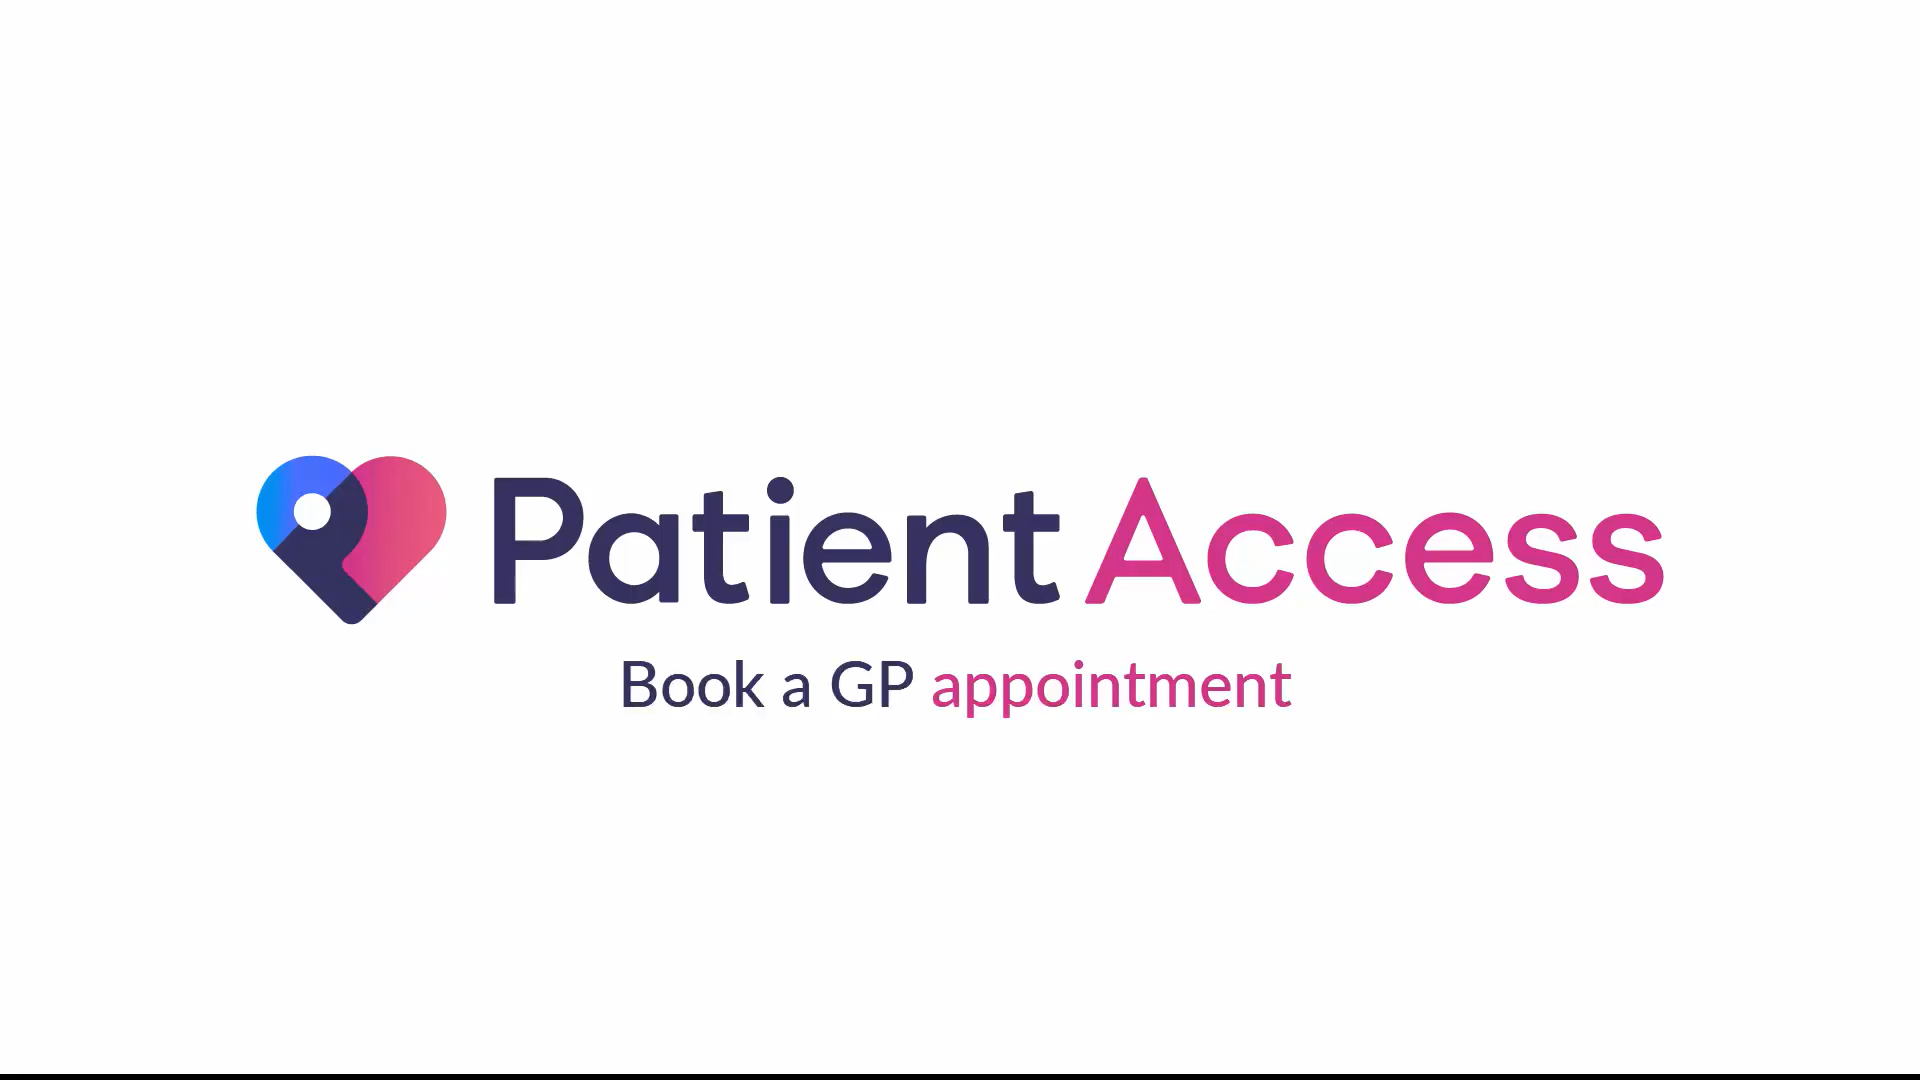 Booking GP appointments